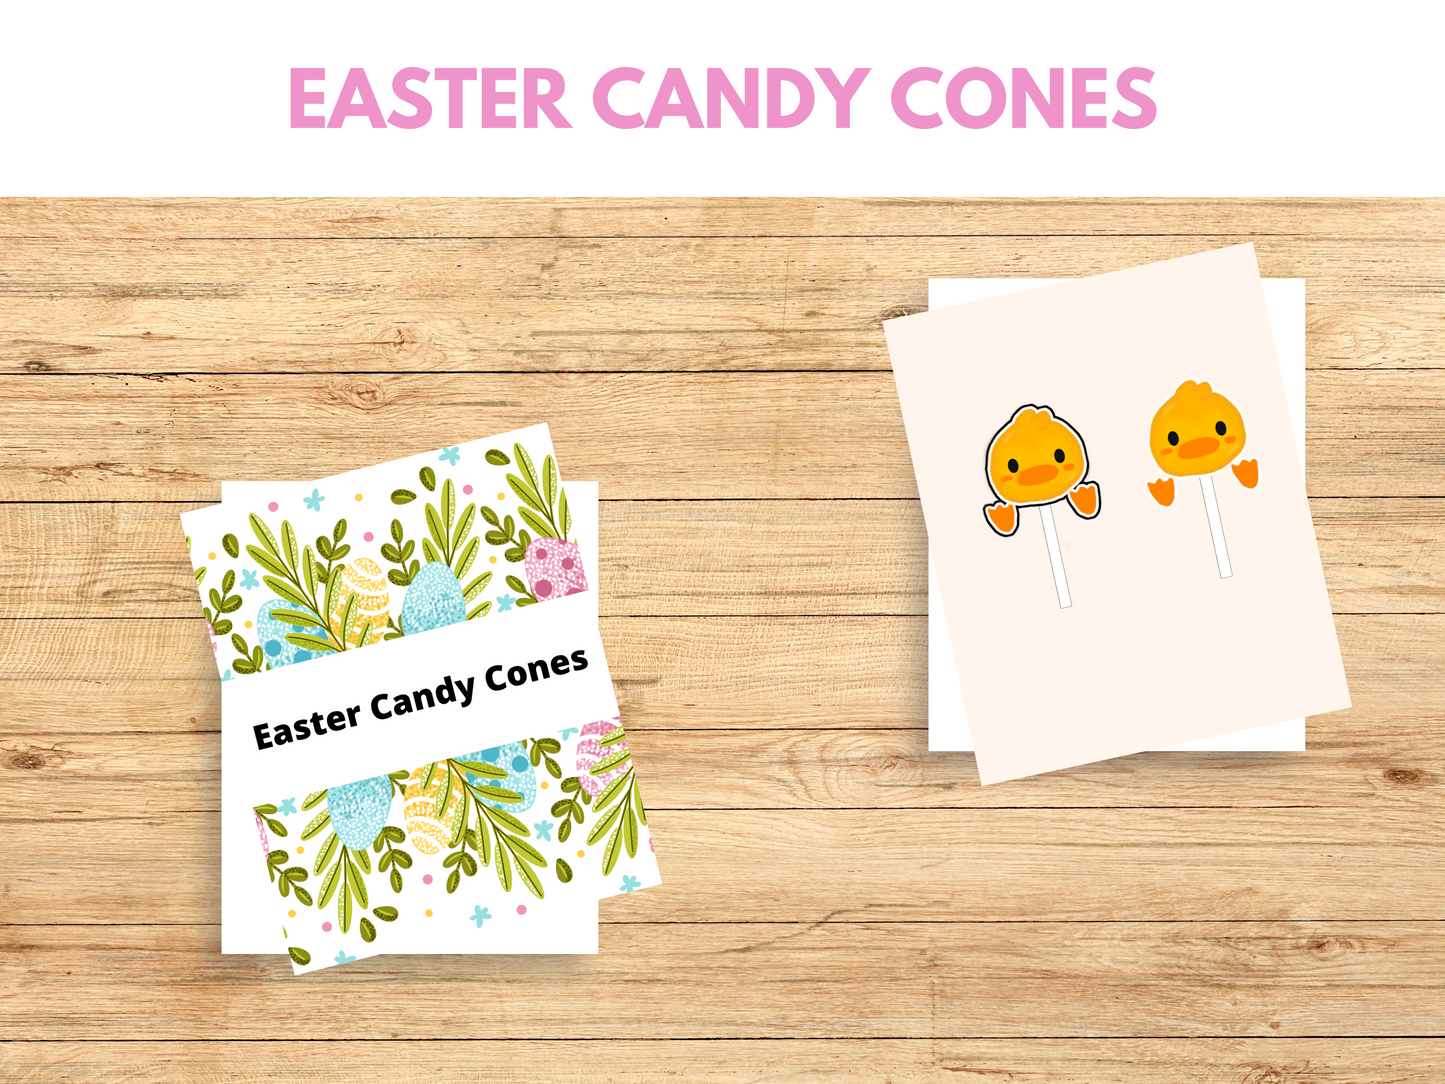 Cut printable Easter crafts to make a Easter candy cone.   Two yellow ducks for extra props.